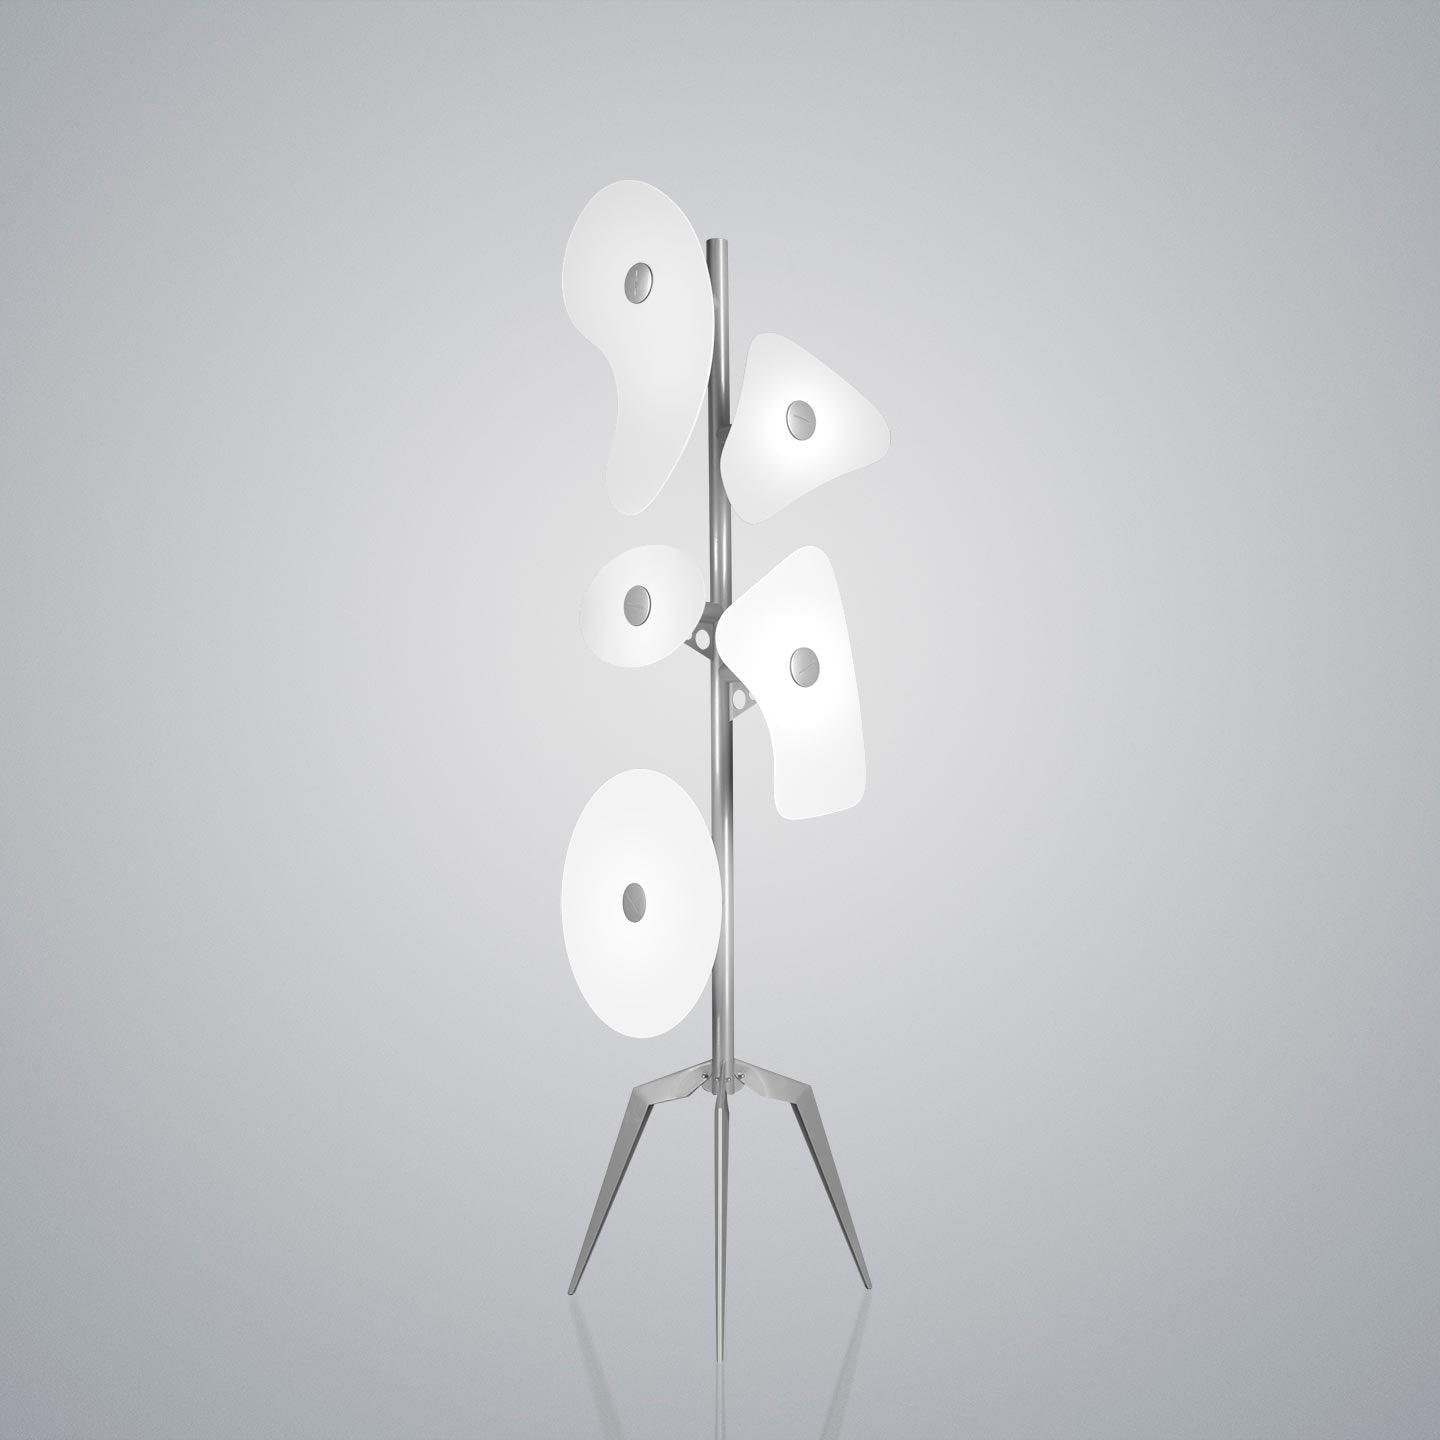 White Orbital Floor Lamp with a diameter of 19.6 inches and a height of 66.9 inches (or 50cm x 170cm) - European Plug